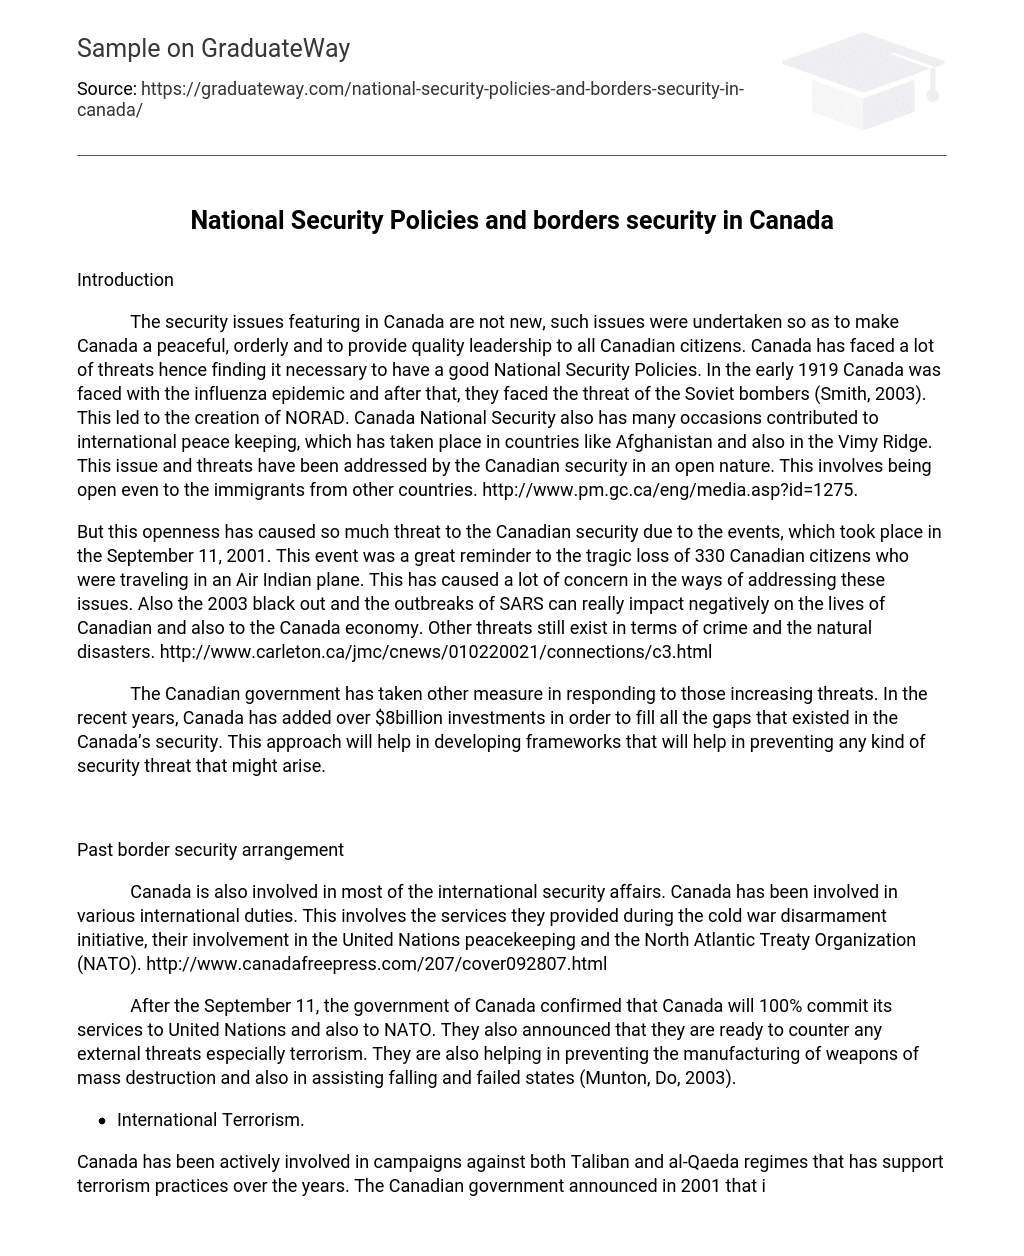 National Security Policies and borders security in Canada